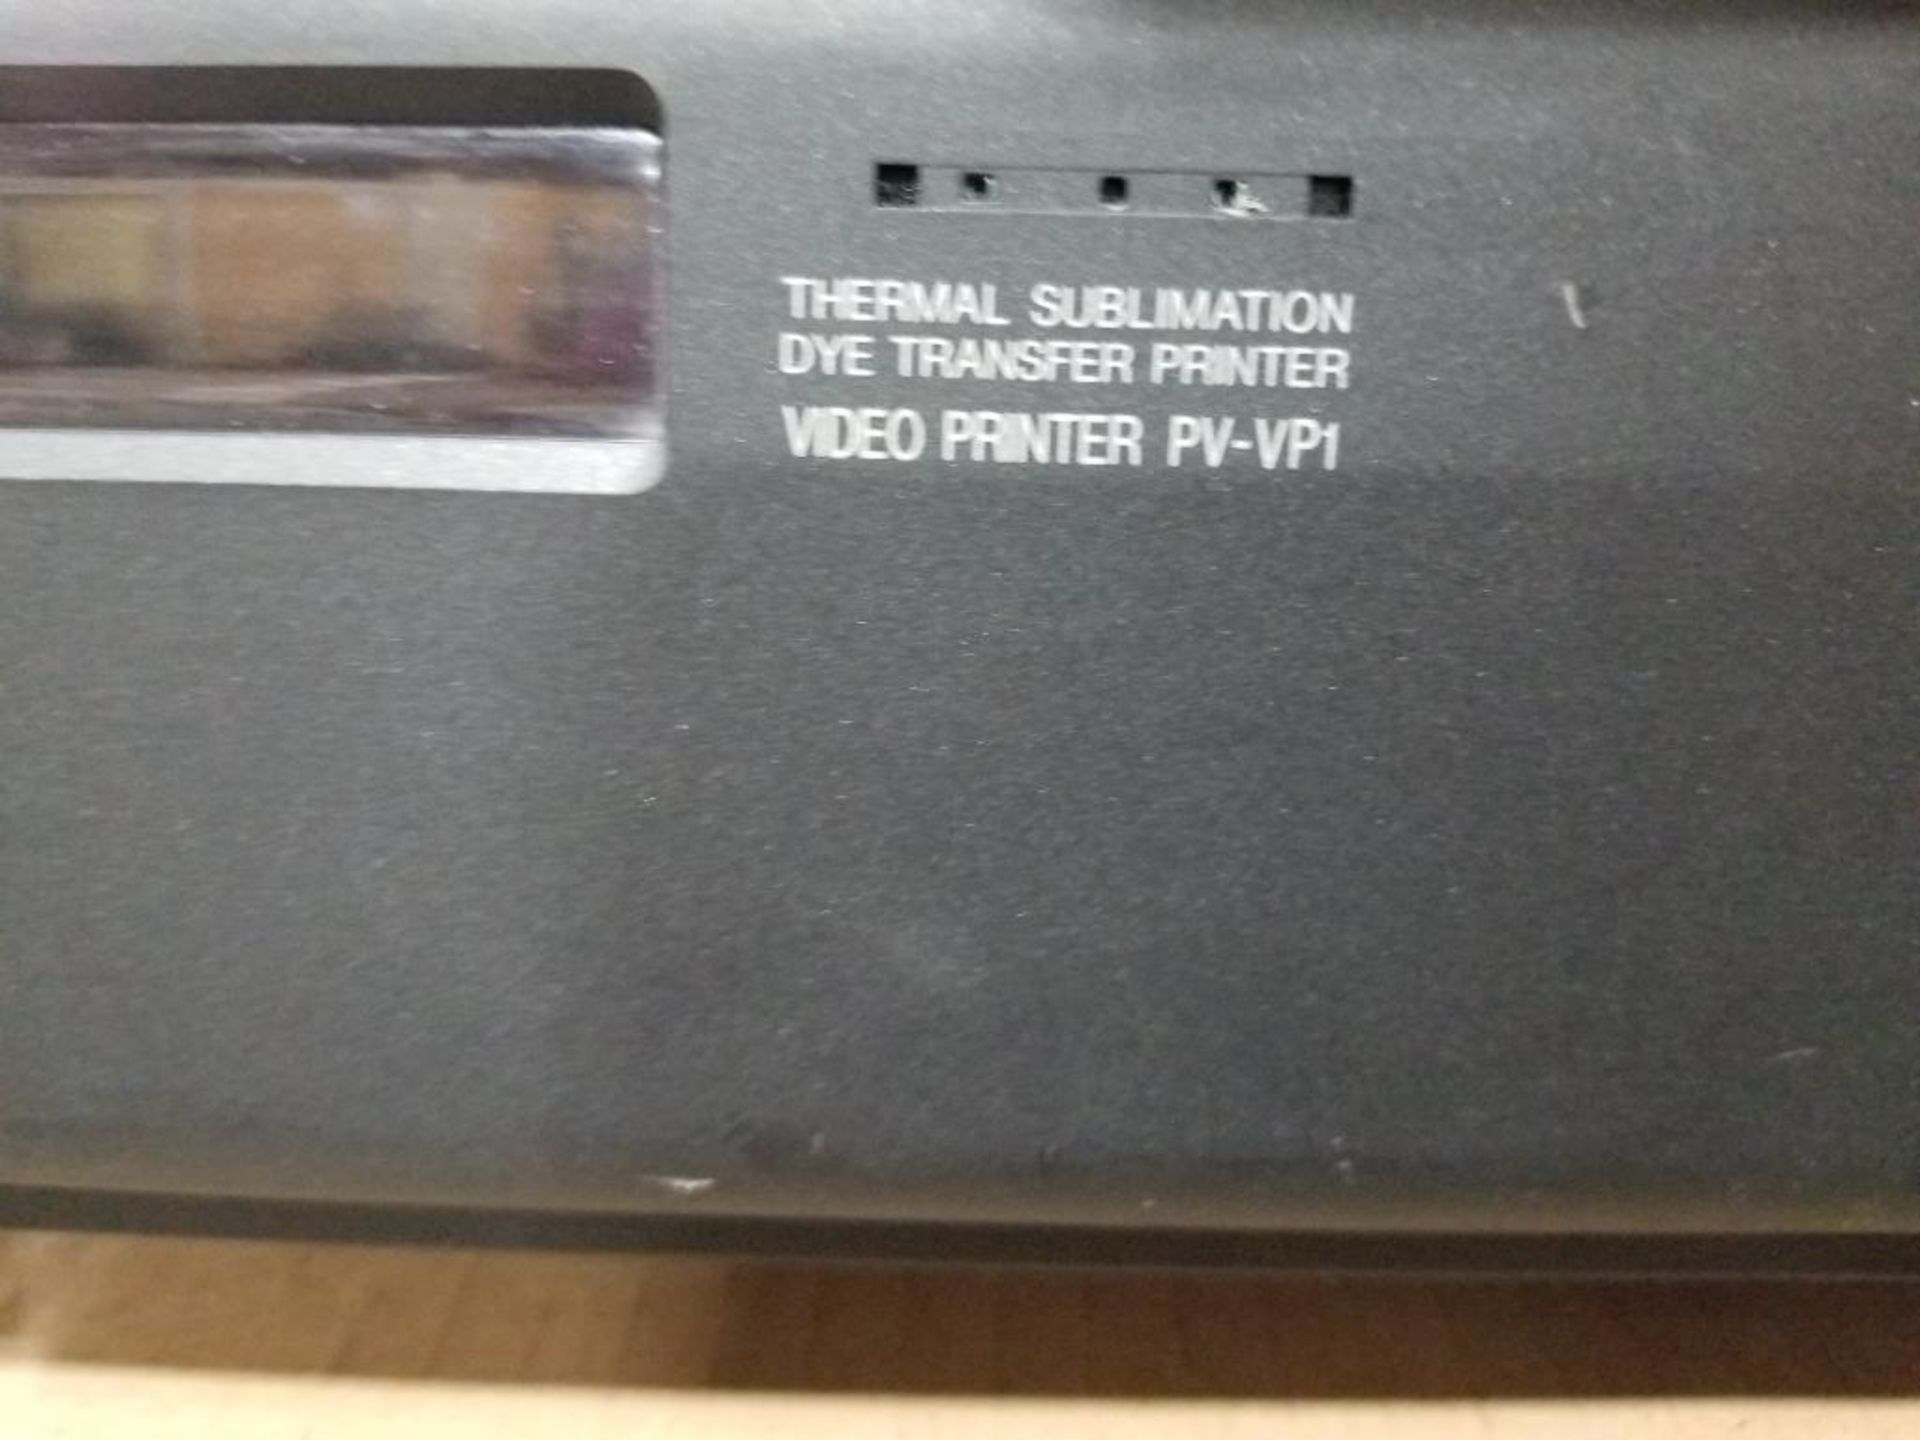 Panasonic Thermal sublimation Dye transfer printer video printer PV-VP1 with SMC Networks router. - Image 9 of 11